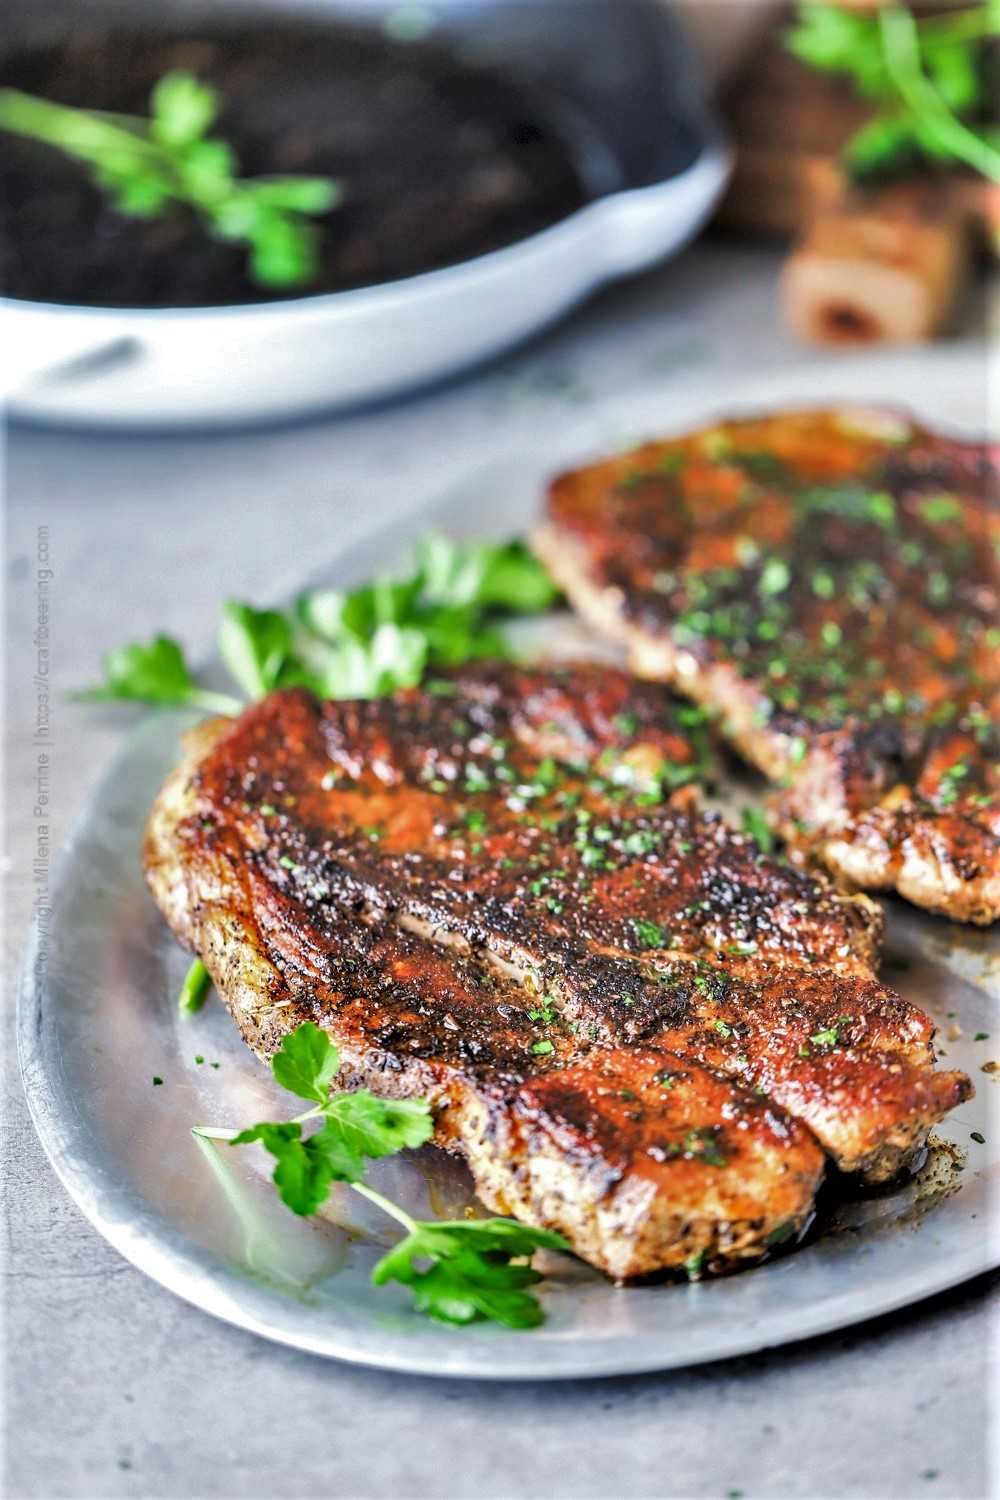 Pan fried pork steaks - nice caramelization from Maillared reaction, juicy and tender.